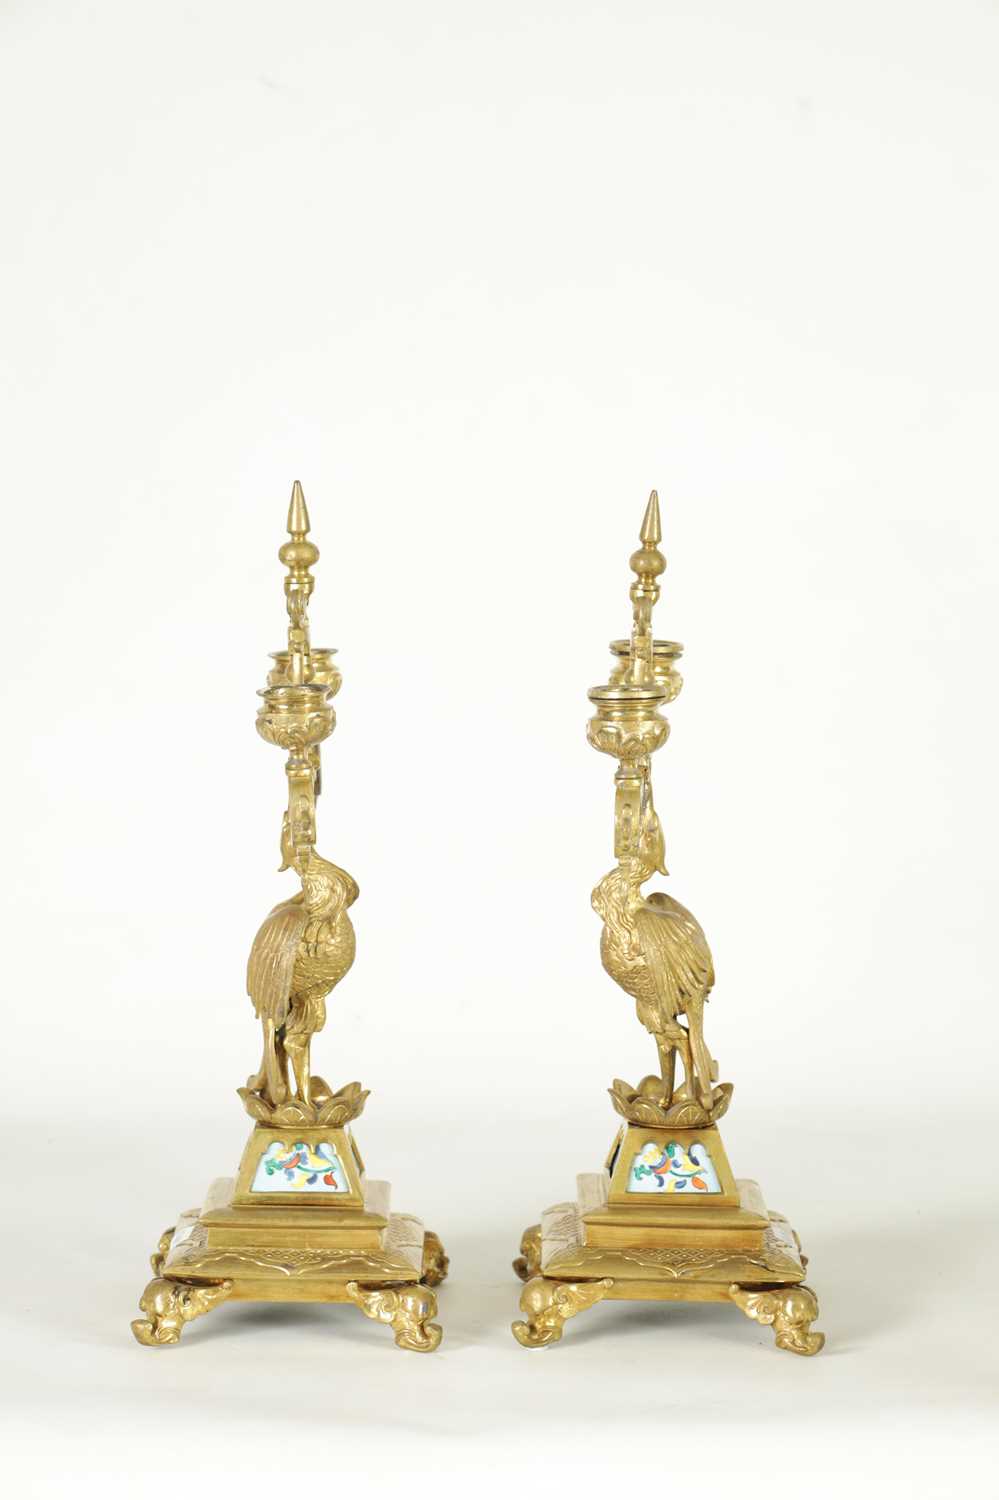 A PAIR OF LATE 19TH CENTURY BRASS AESTHETIC PERIOD DOUBLE BRANCH CANDELABRA - Image 8 of 10